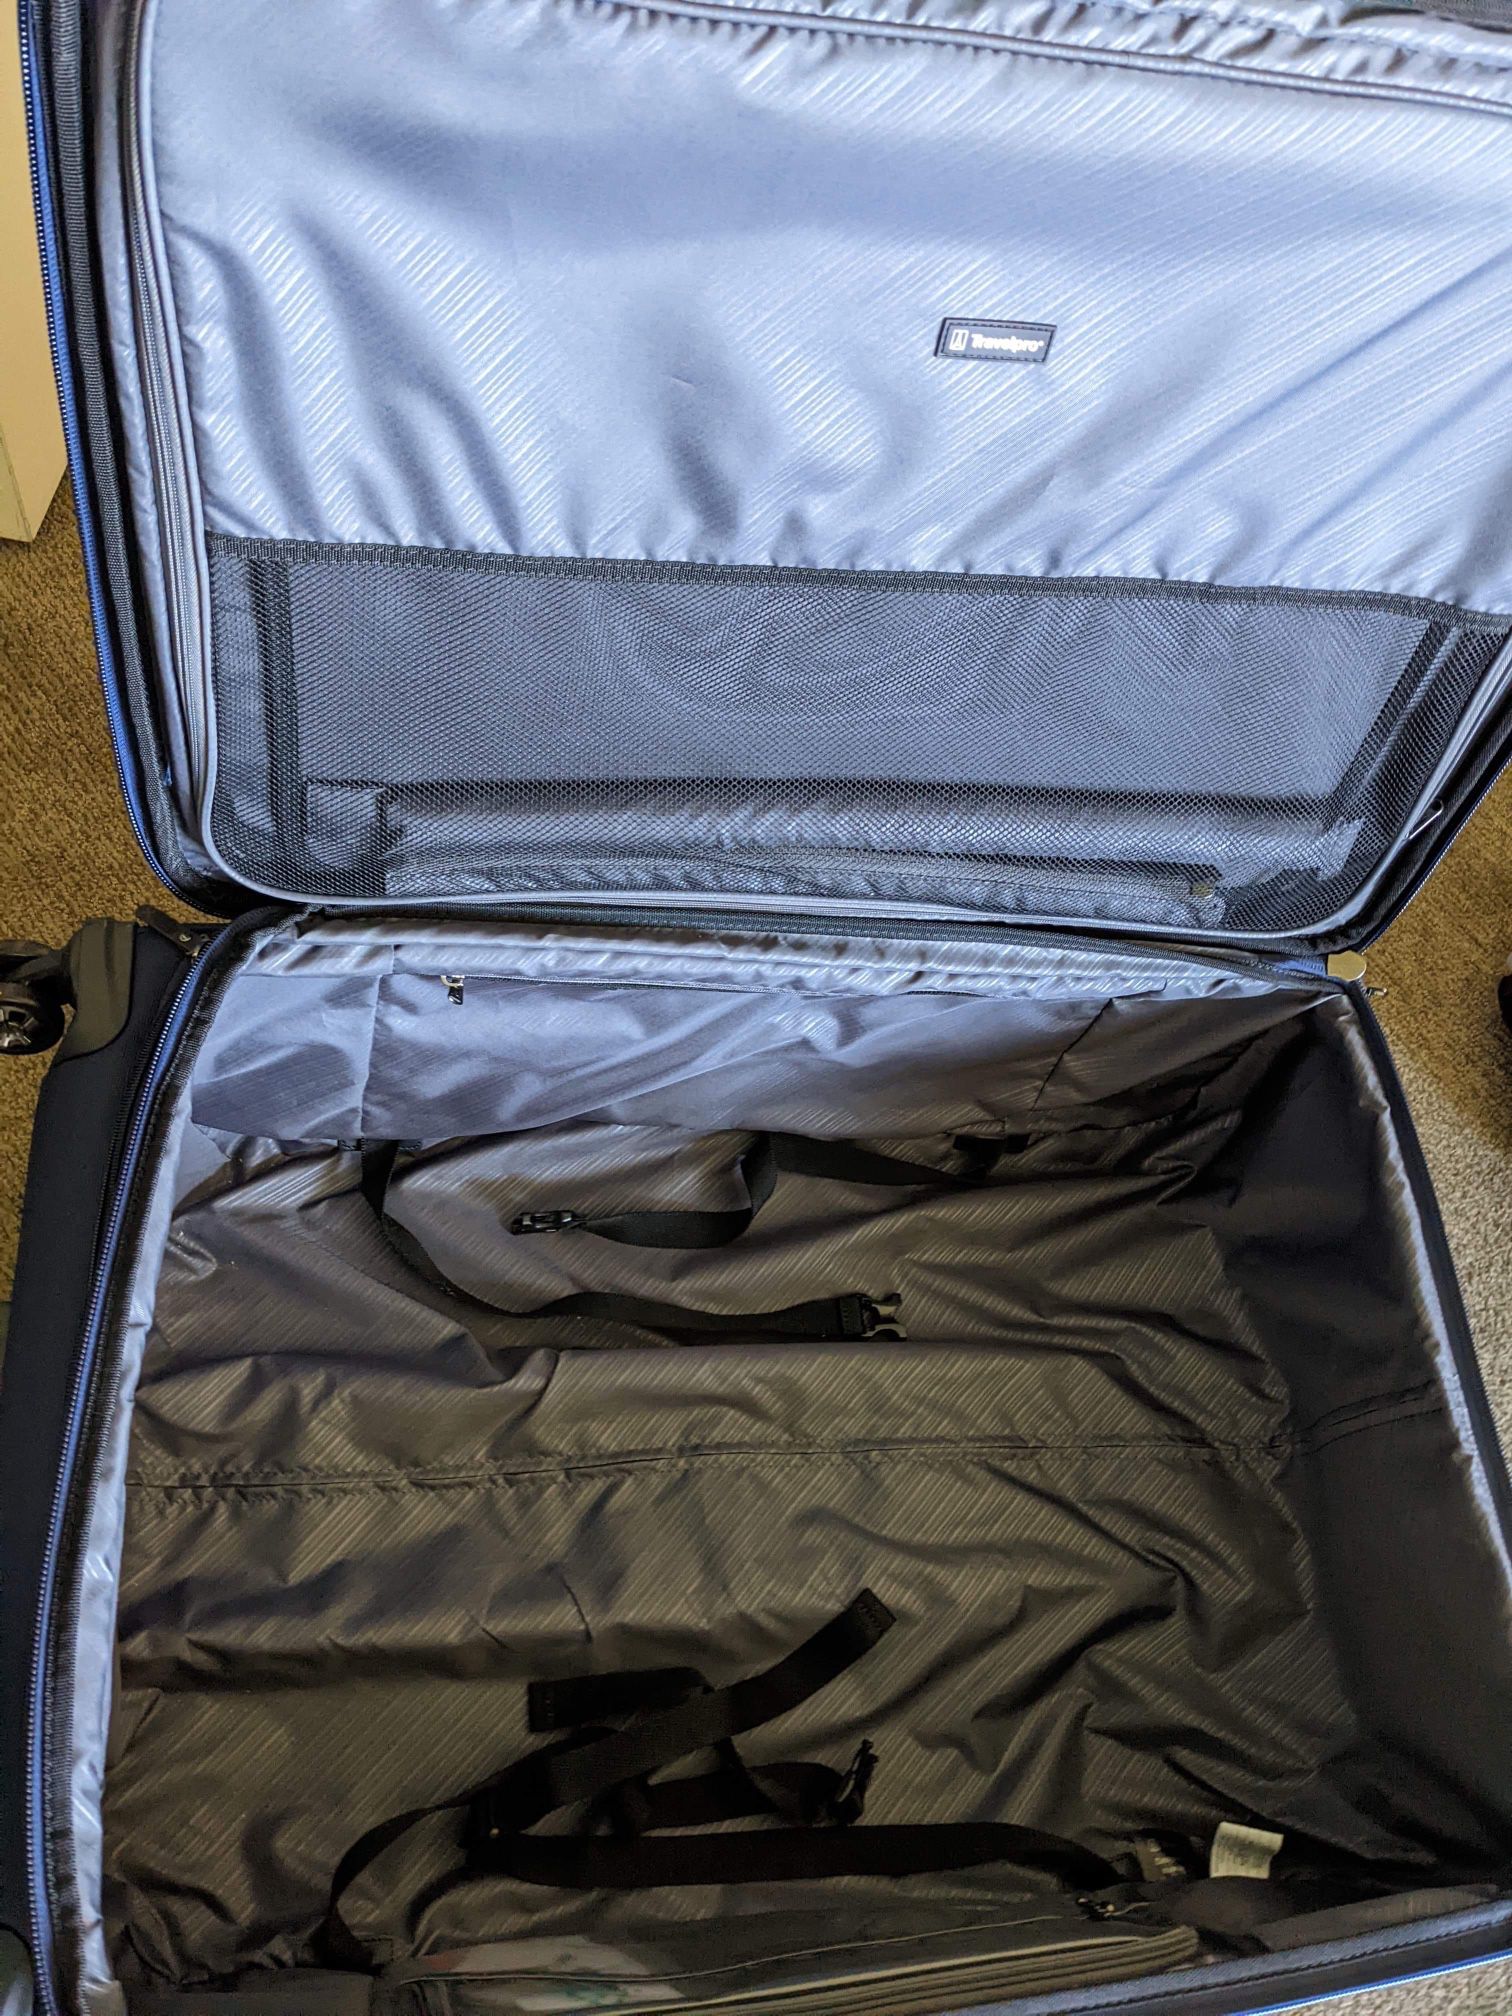 NEW: Checked-Large 29 Inch Luggage